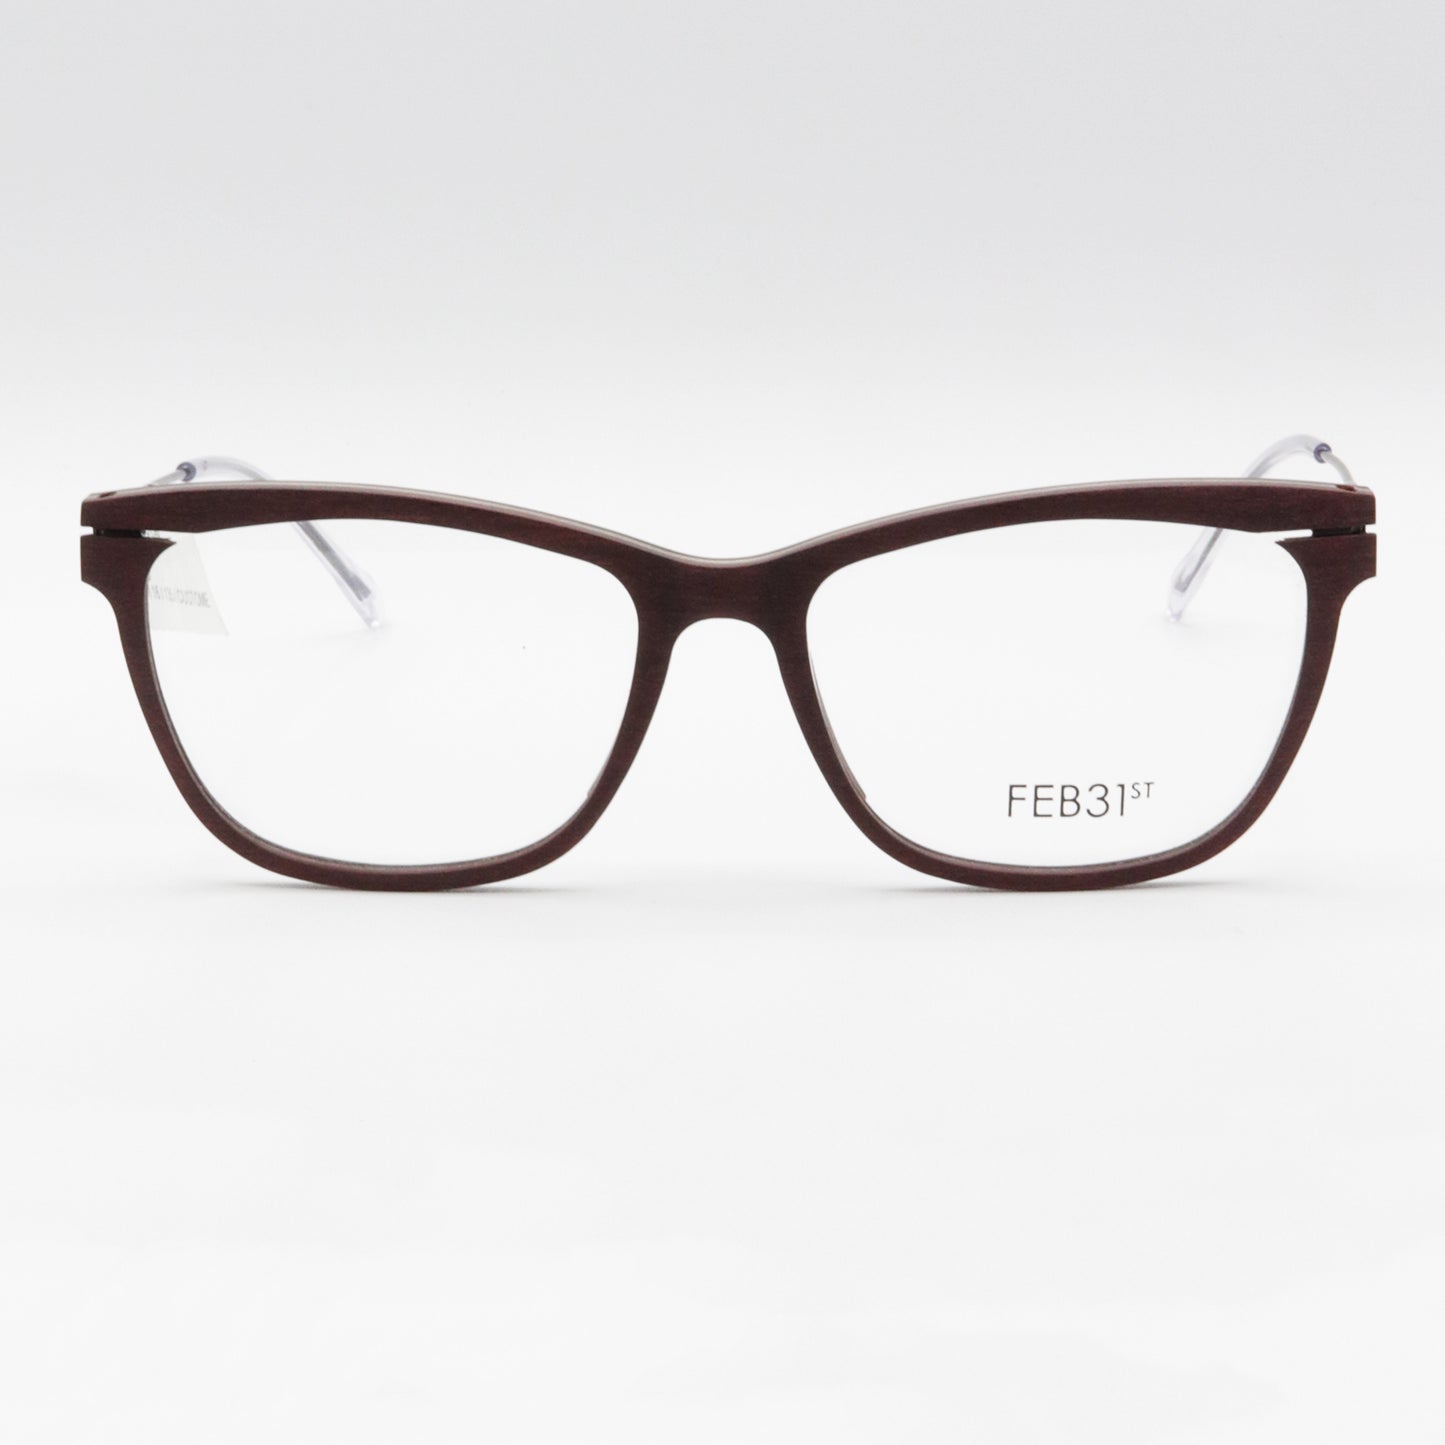 Simo by FEB31st wooden glasses Burgundy Brown